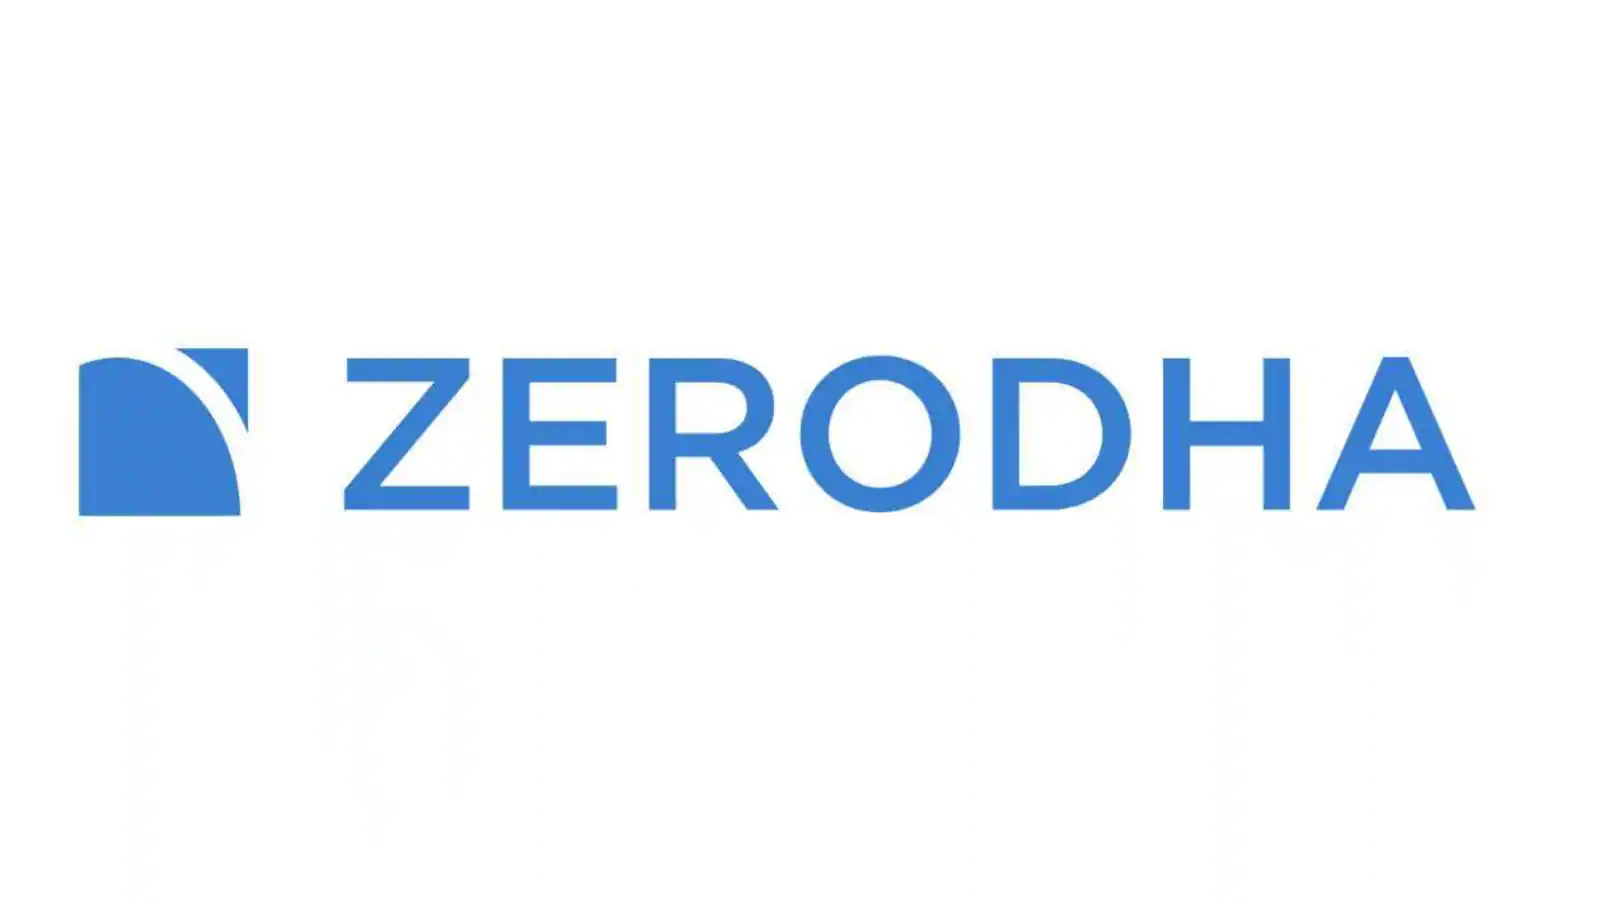 https://stockmarketkacommando.com/how-to-do-intraday-trading-in-zerodha-with-leverage-12-step/